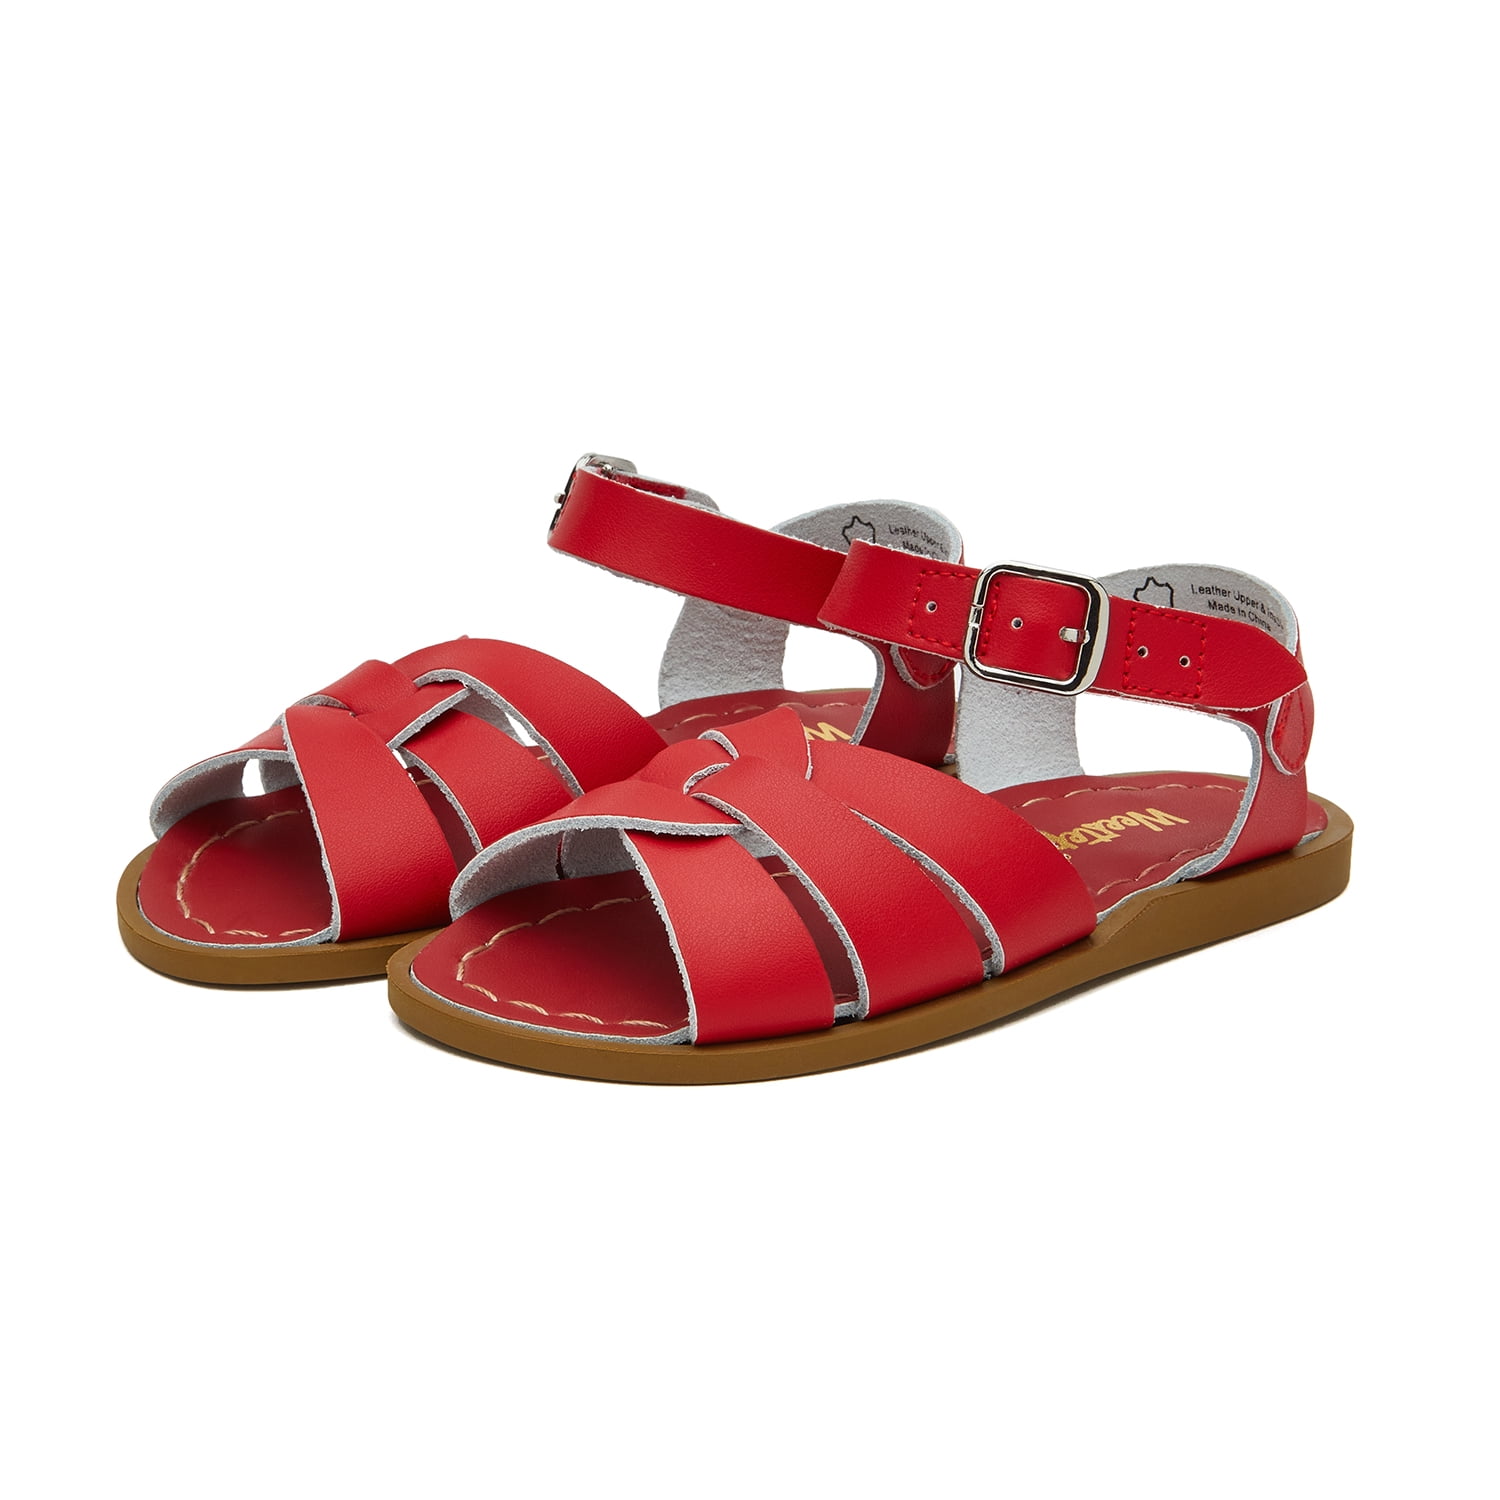 Weestep Gilrs Hook and Loop Leather Calssic Water Sandal - Walmart.com